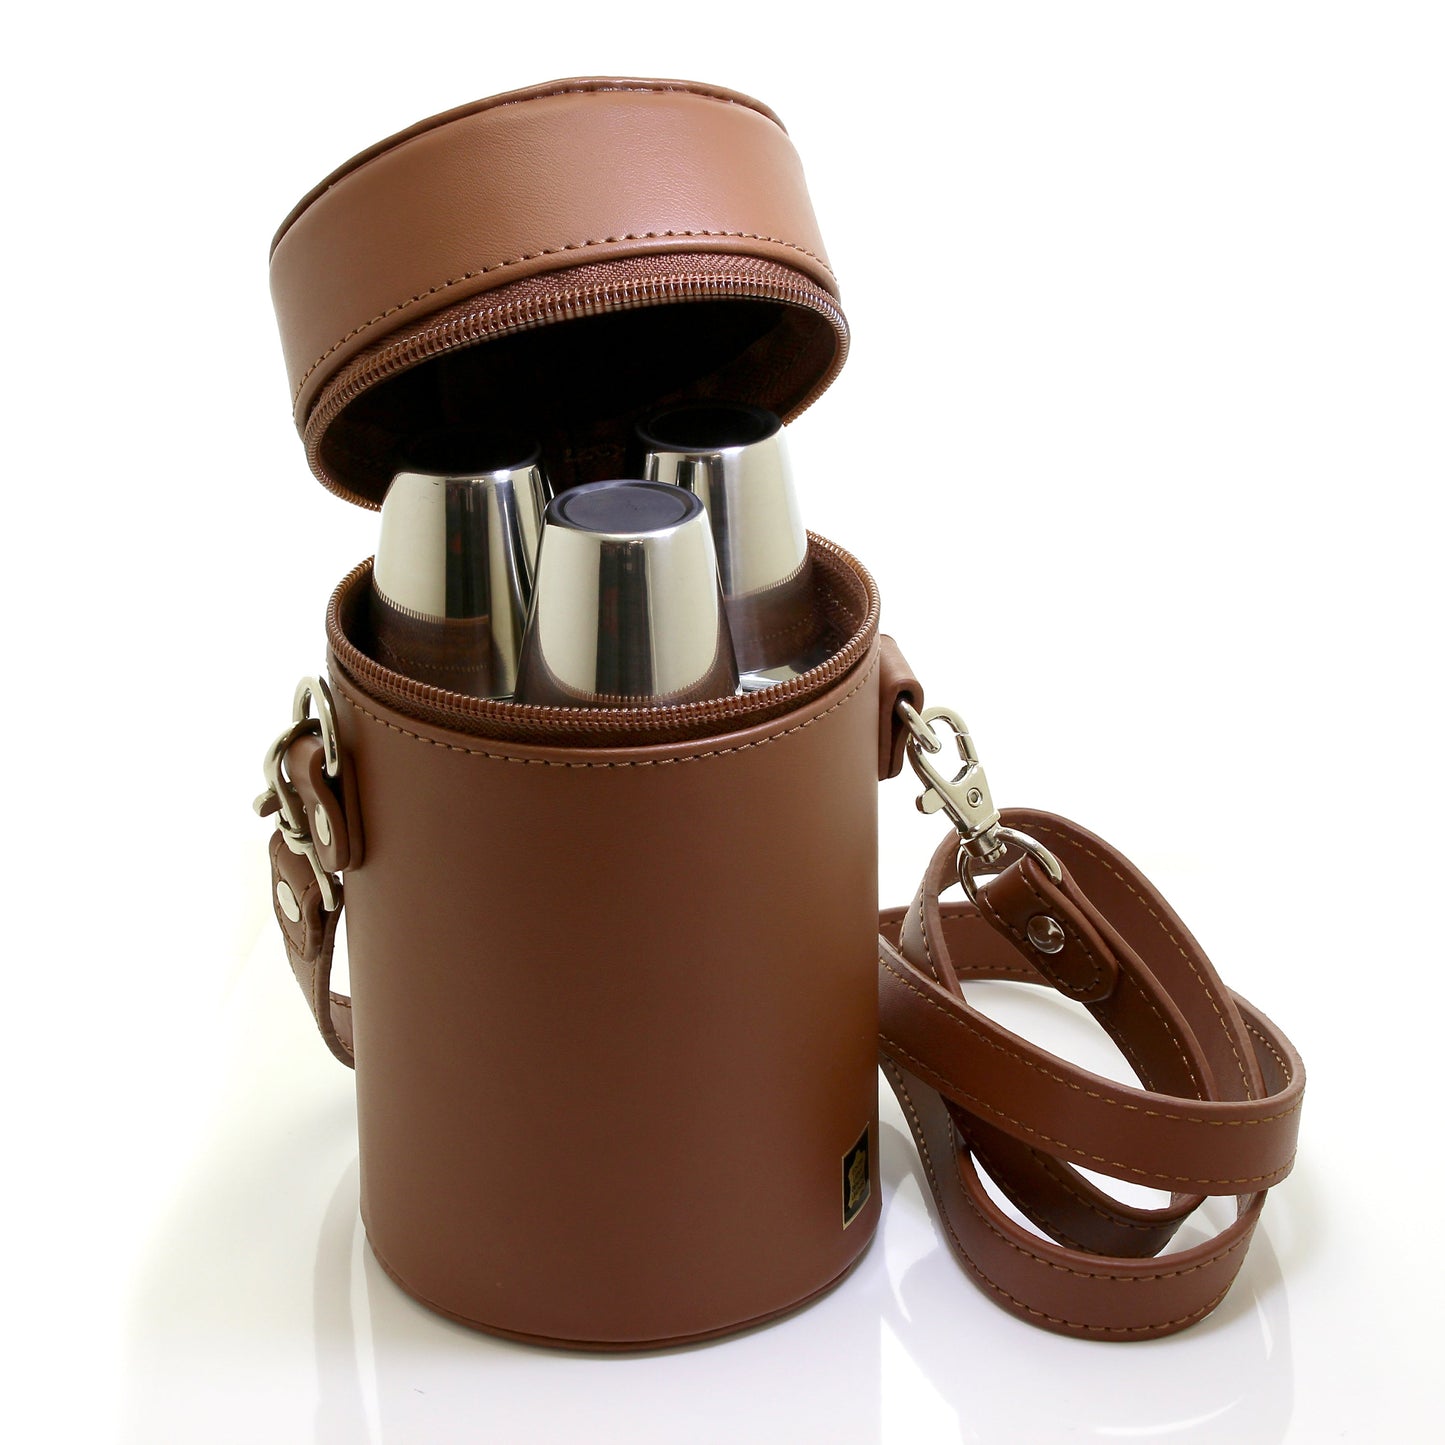 Set of 3 6oz Stainless Steel Hipflasks with Leather Travel Case and Nip Cups